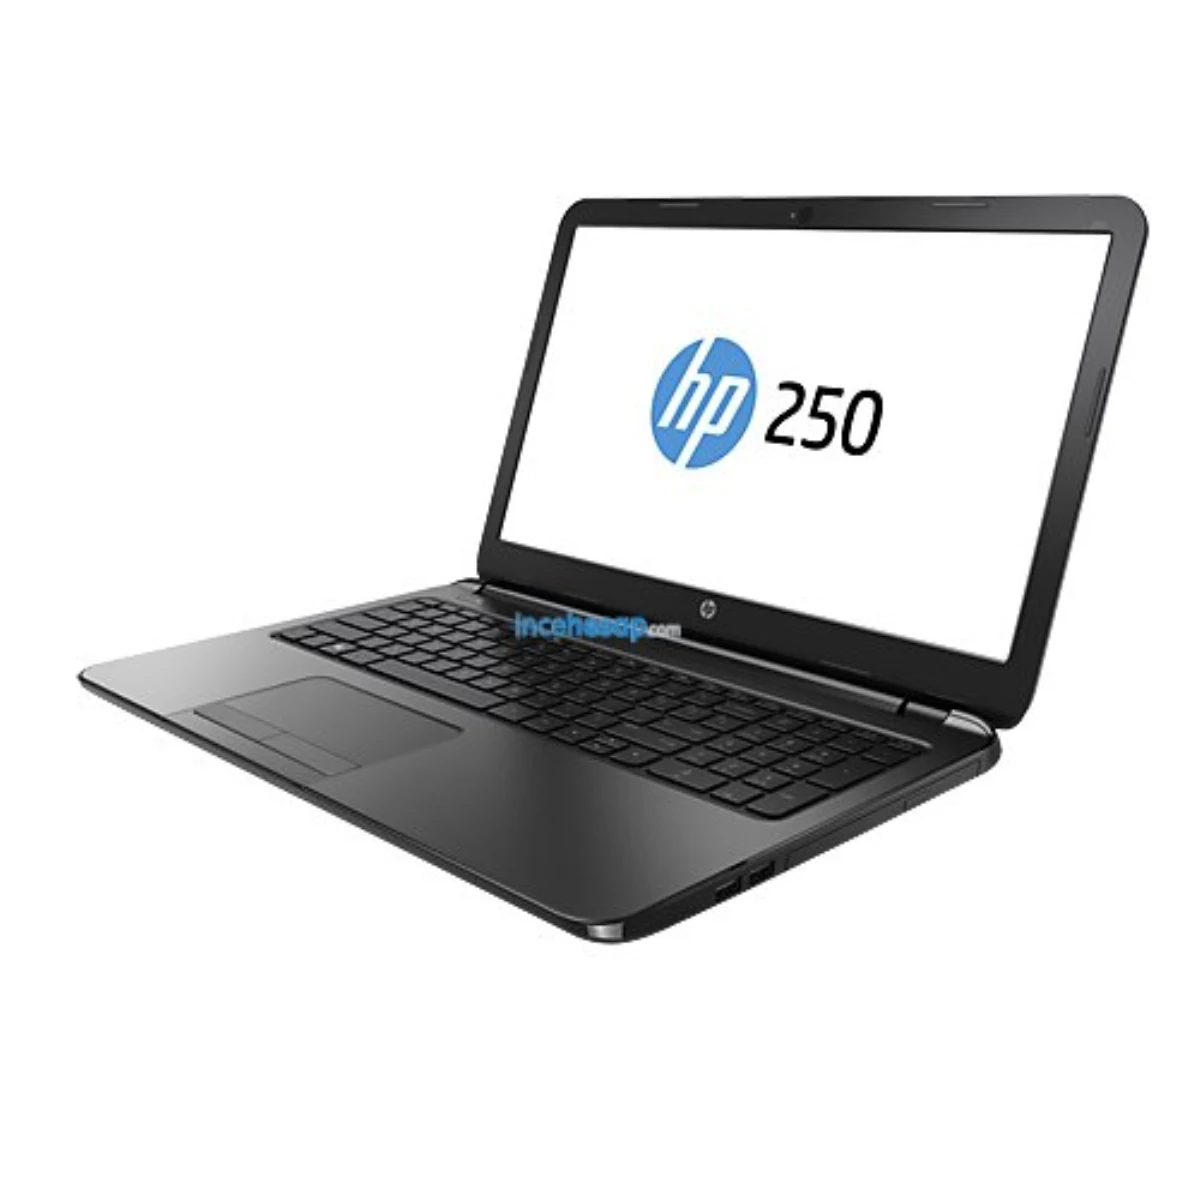 Hp Tcr 250 G3 J0x92ea Notebook